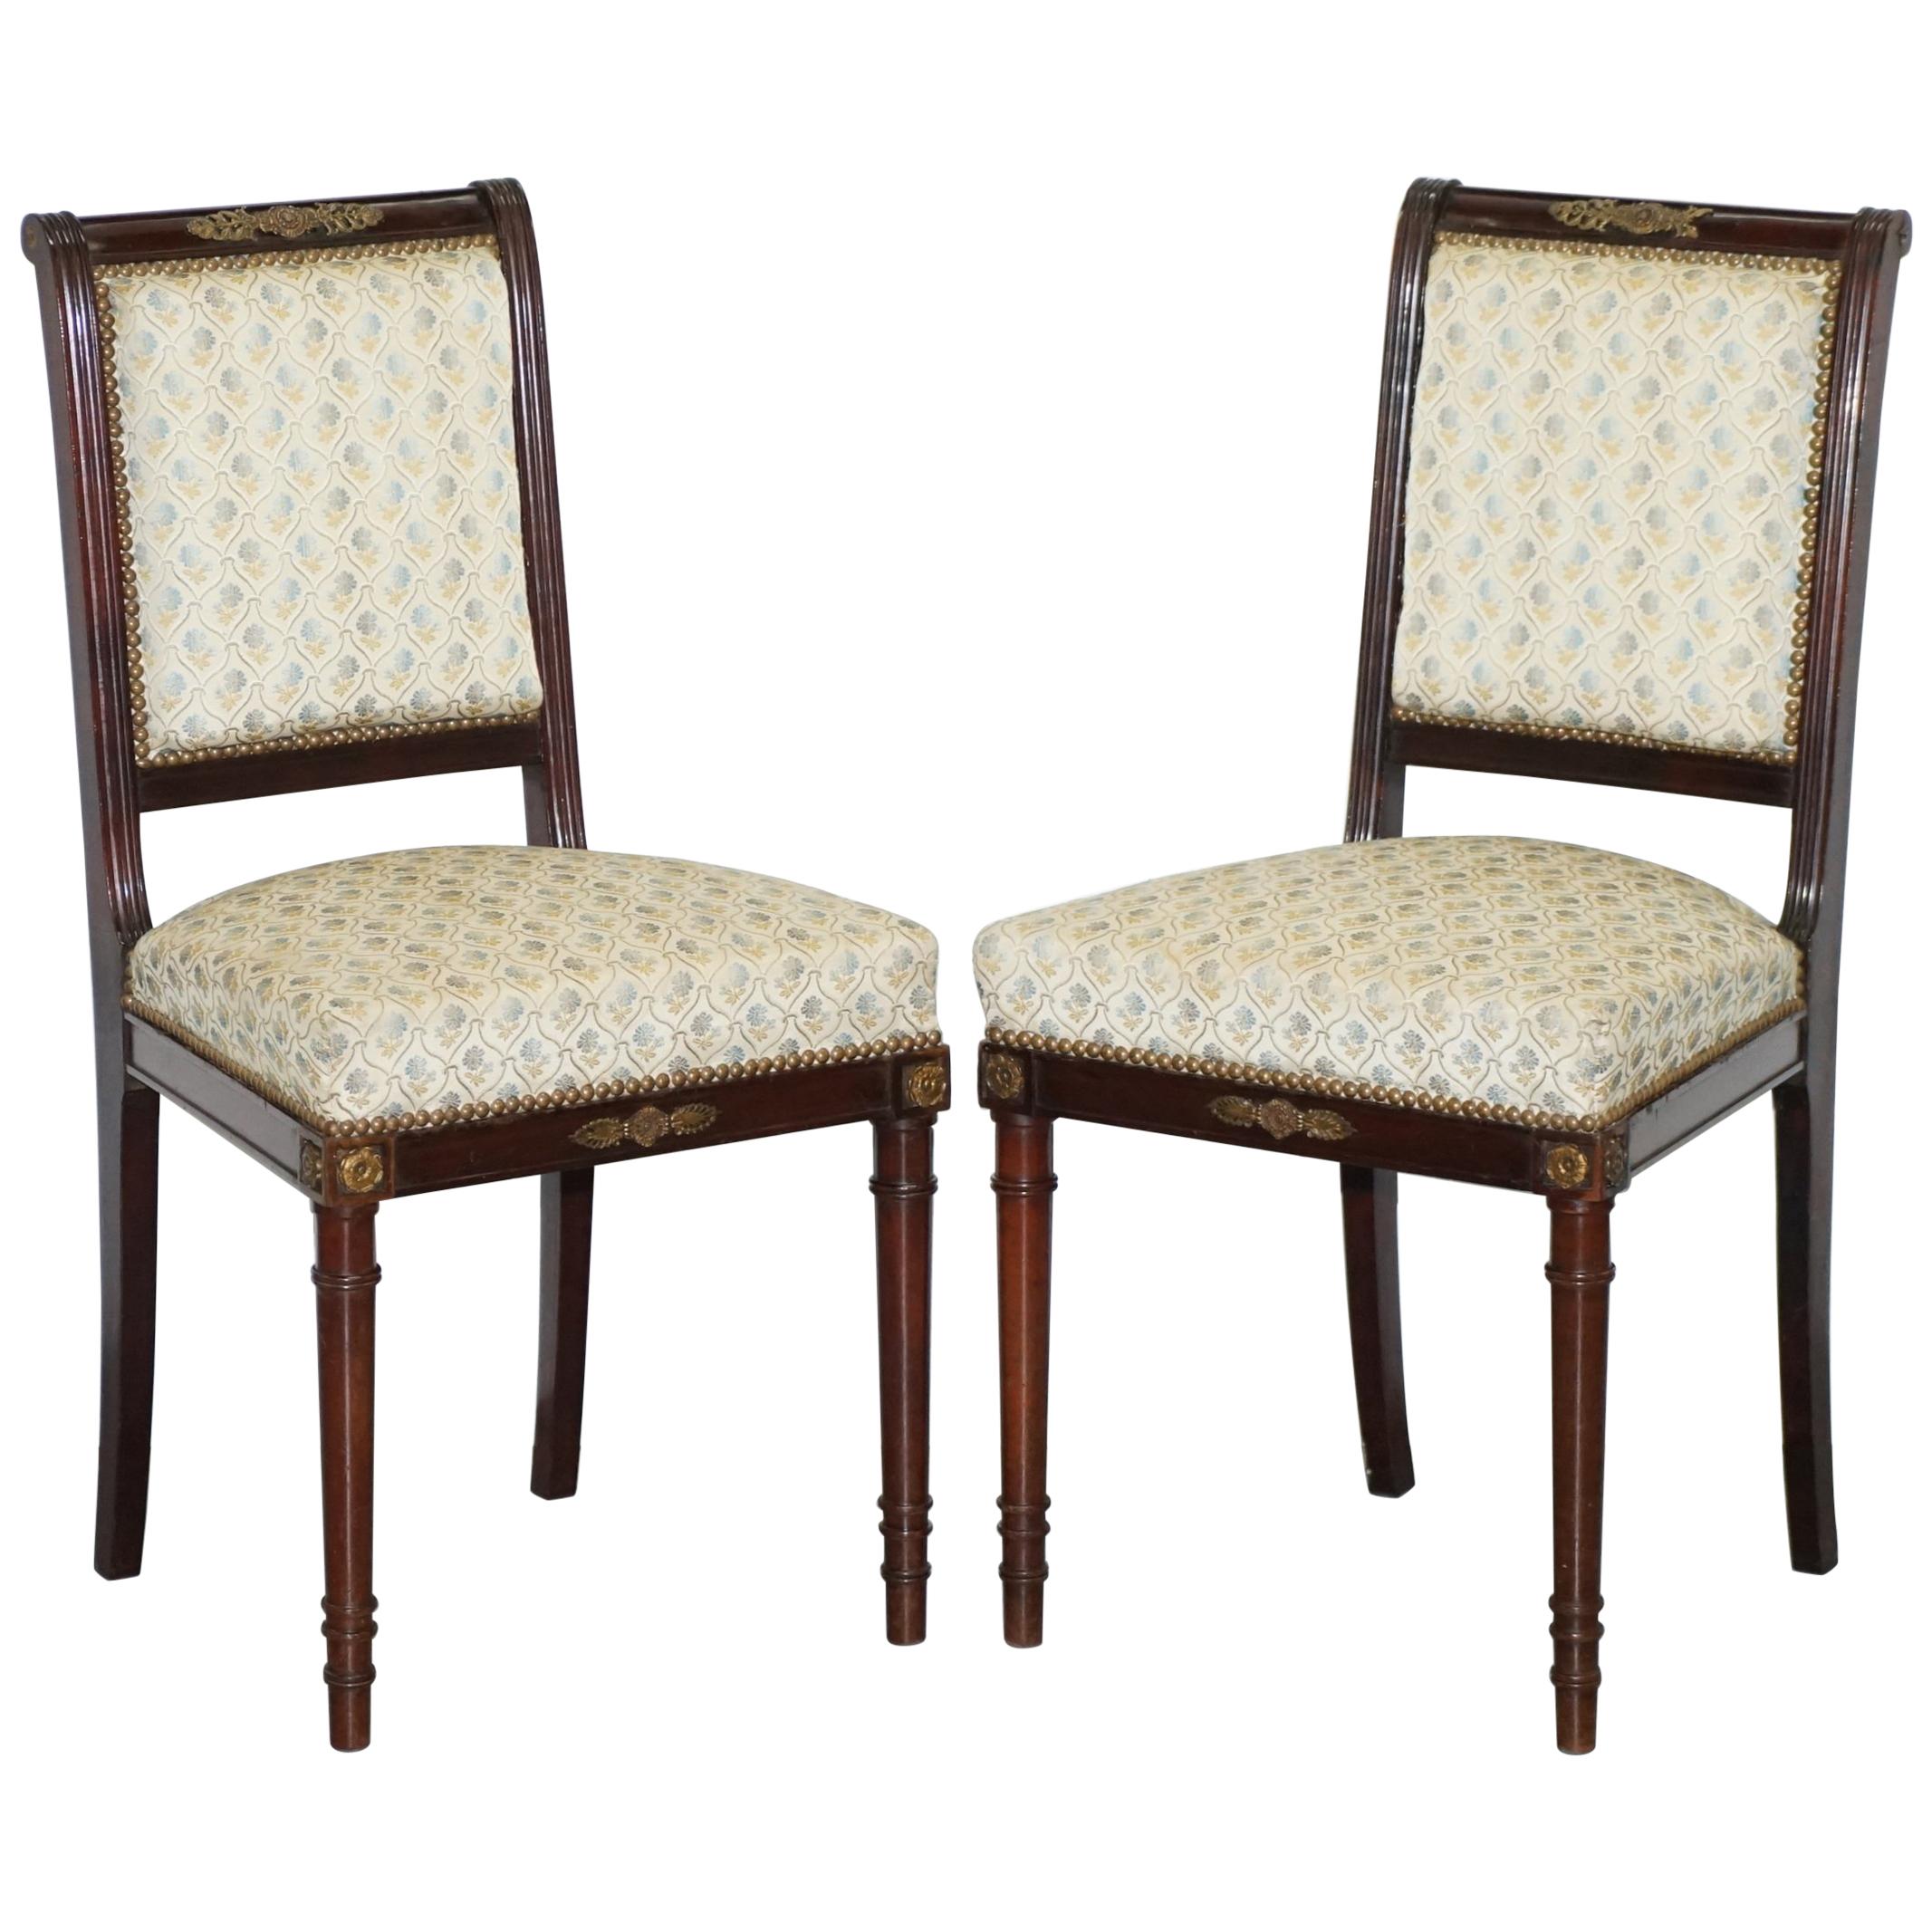 Vintage French Empire Mahogany Napoleon Style Dining Chairs Pair Ormolu Mounts